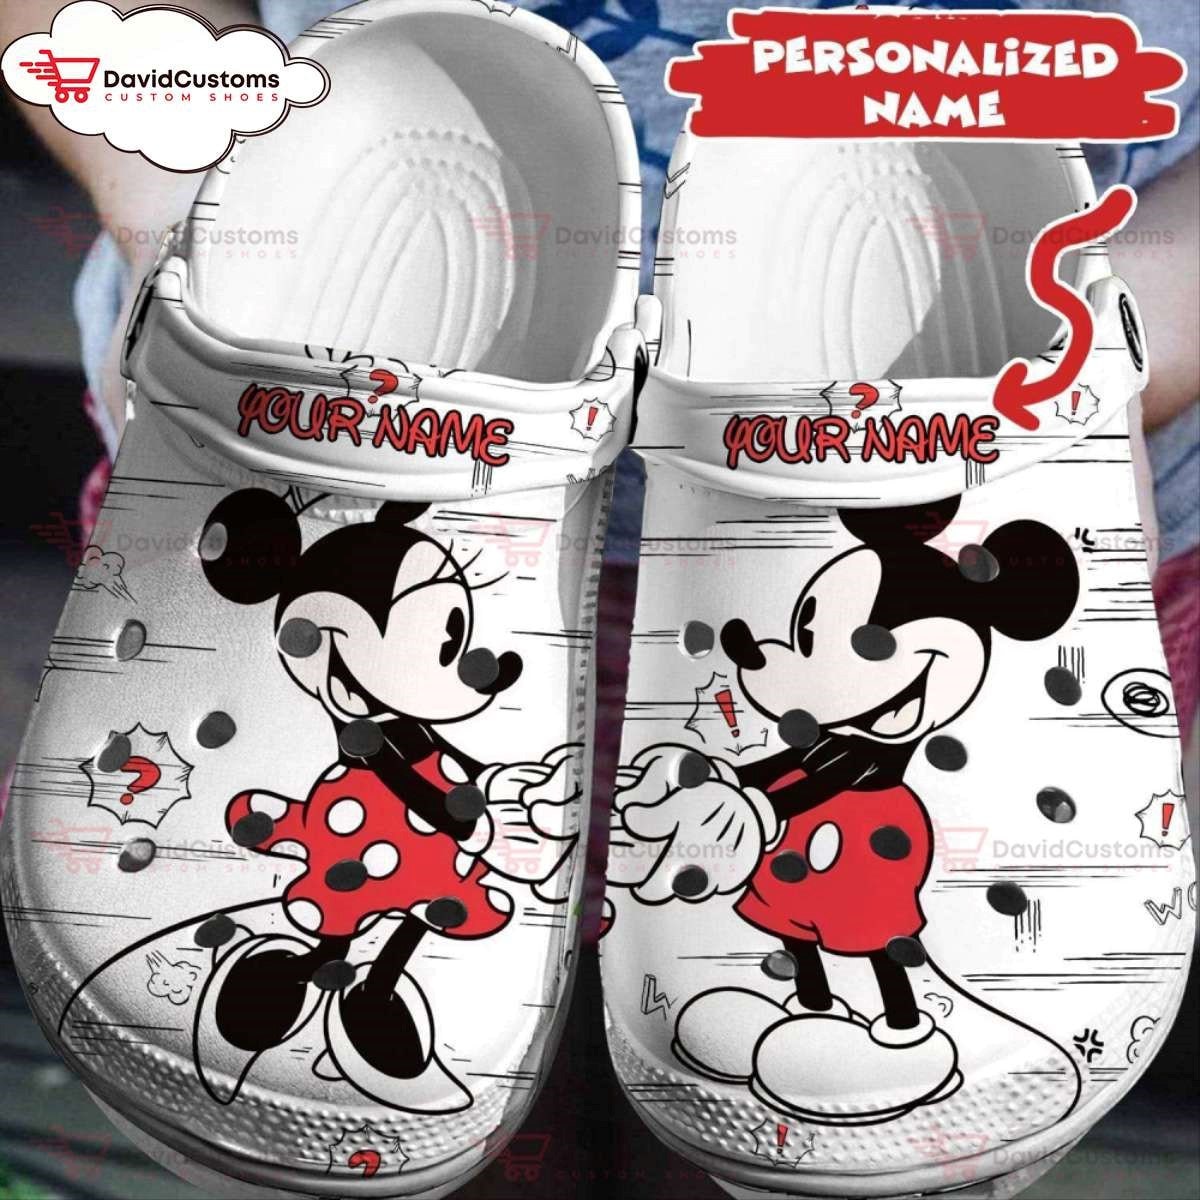 Disney Fantasies Made Real Personalized Mickey Minnie  3D Clog Shoes, Personalized Clogs